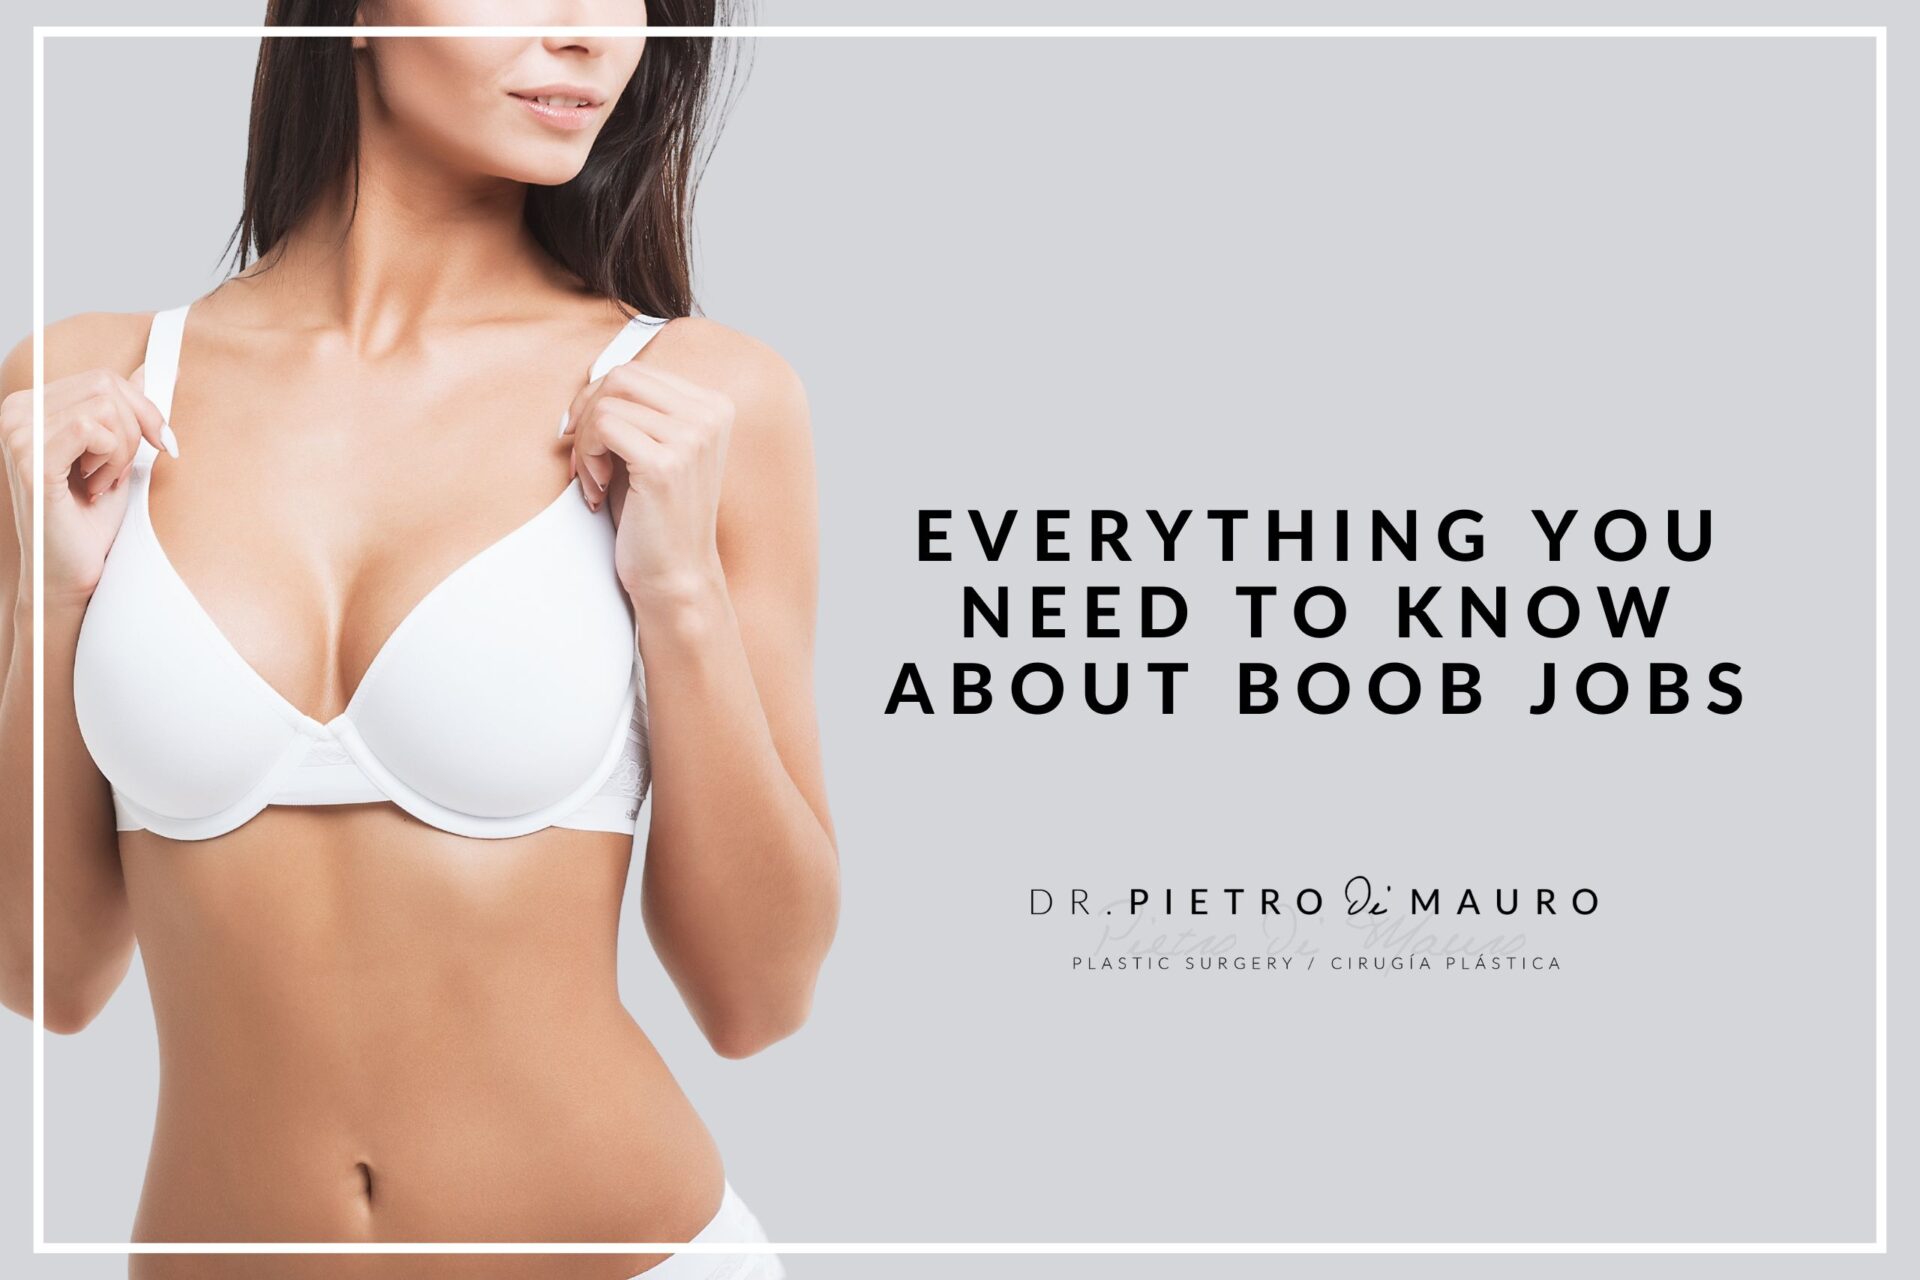 A woman posing, alone in her underwear, holding her bra. With the title of Pietro di Mauro's new blog: Everything you need to know about boob jobs.